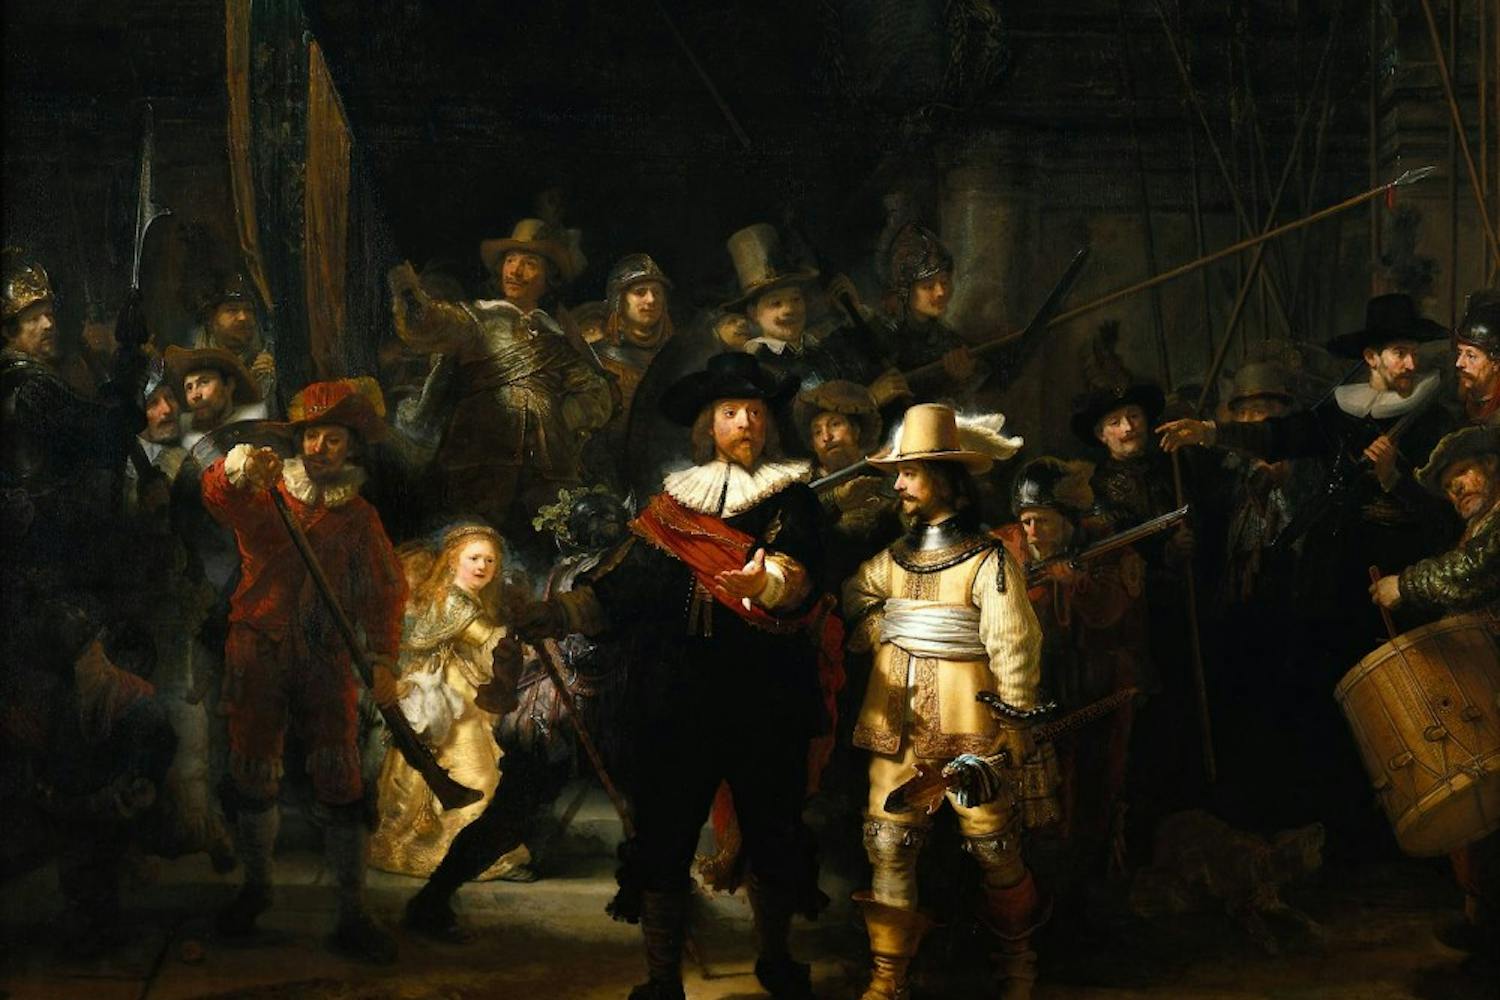 "The Nightwatch" by Rembrandt.